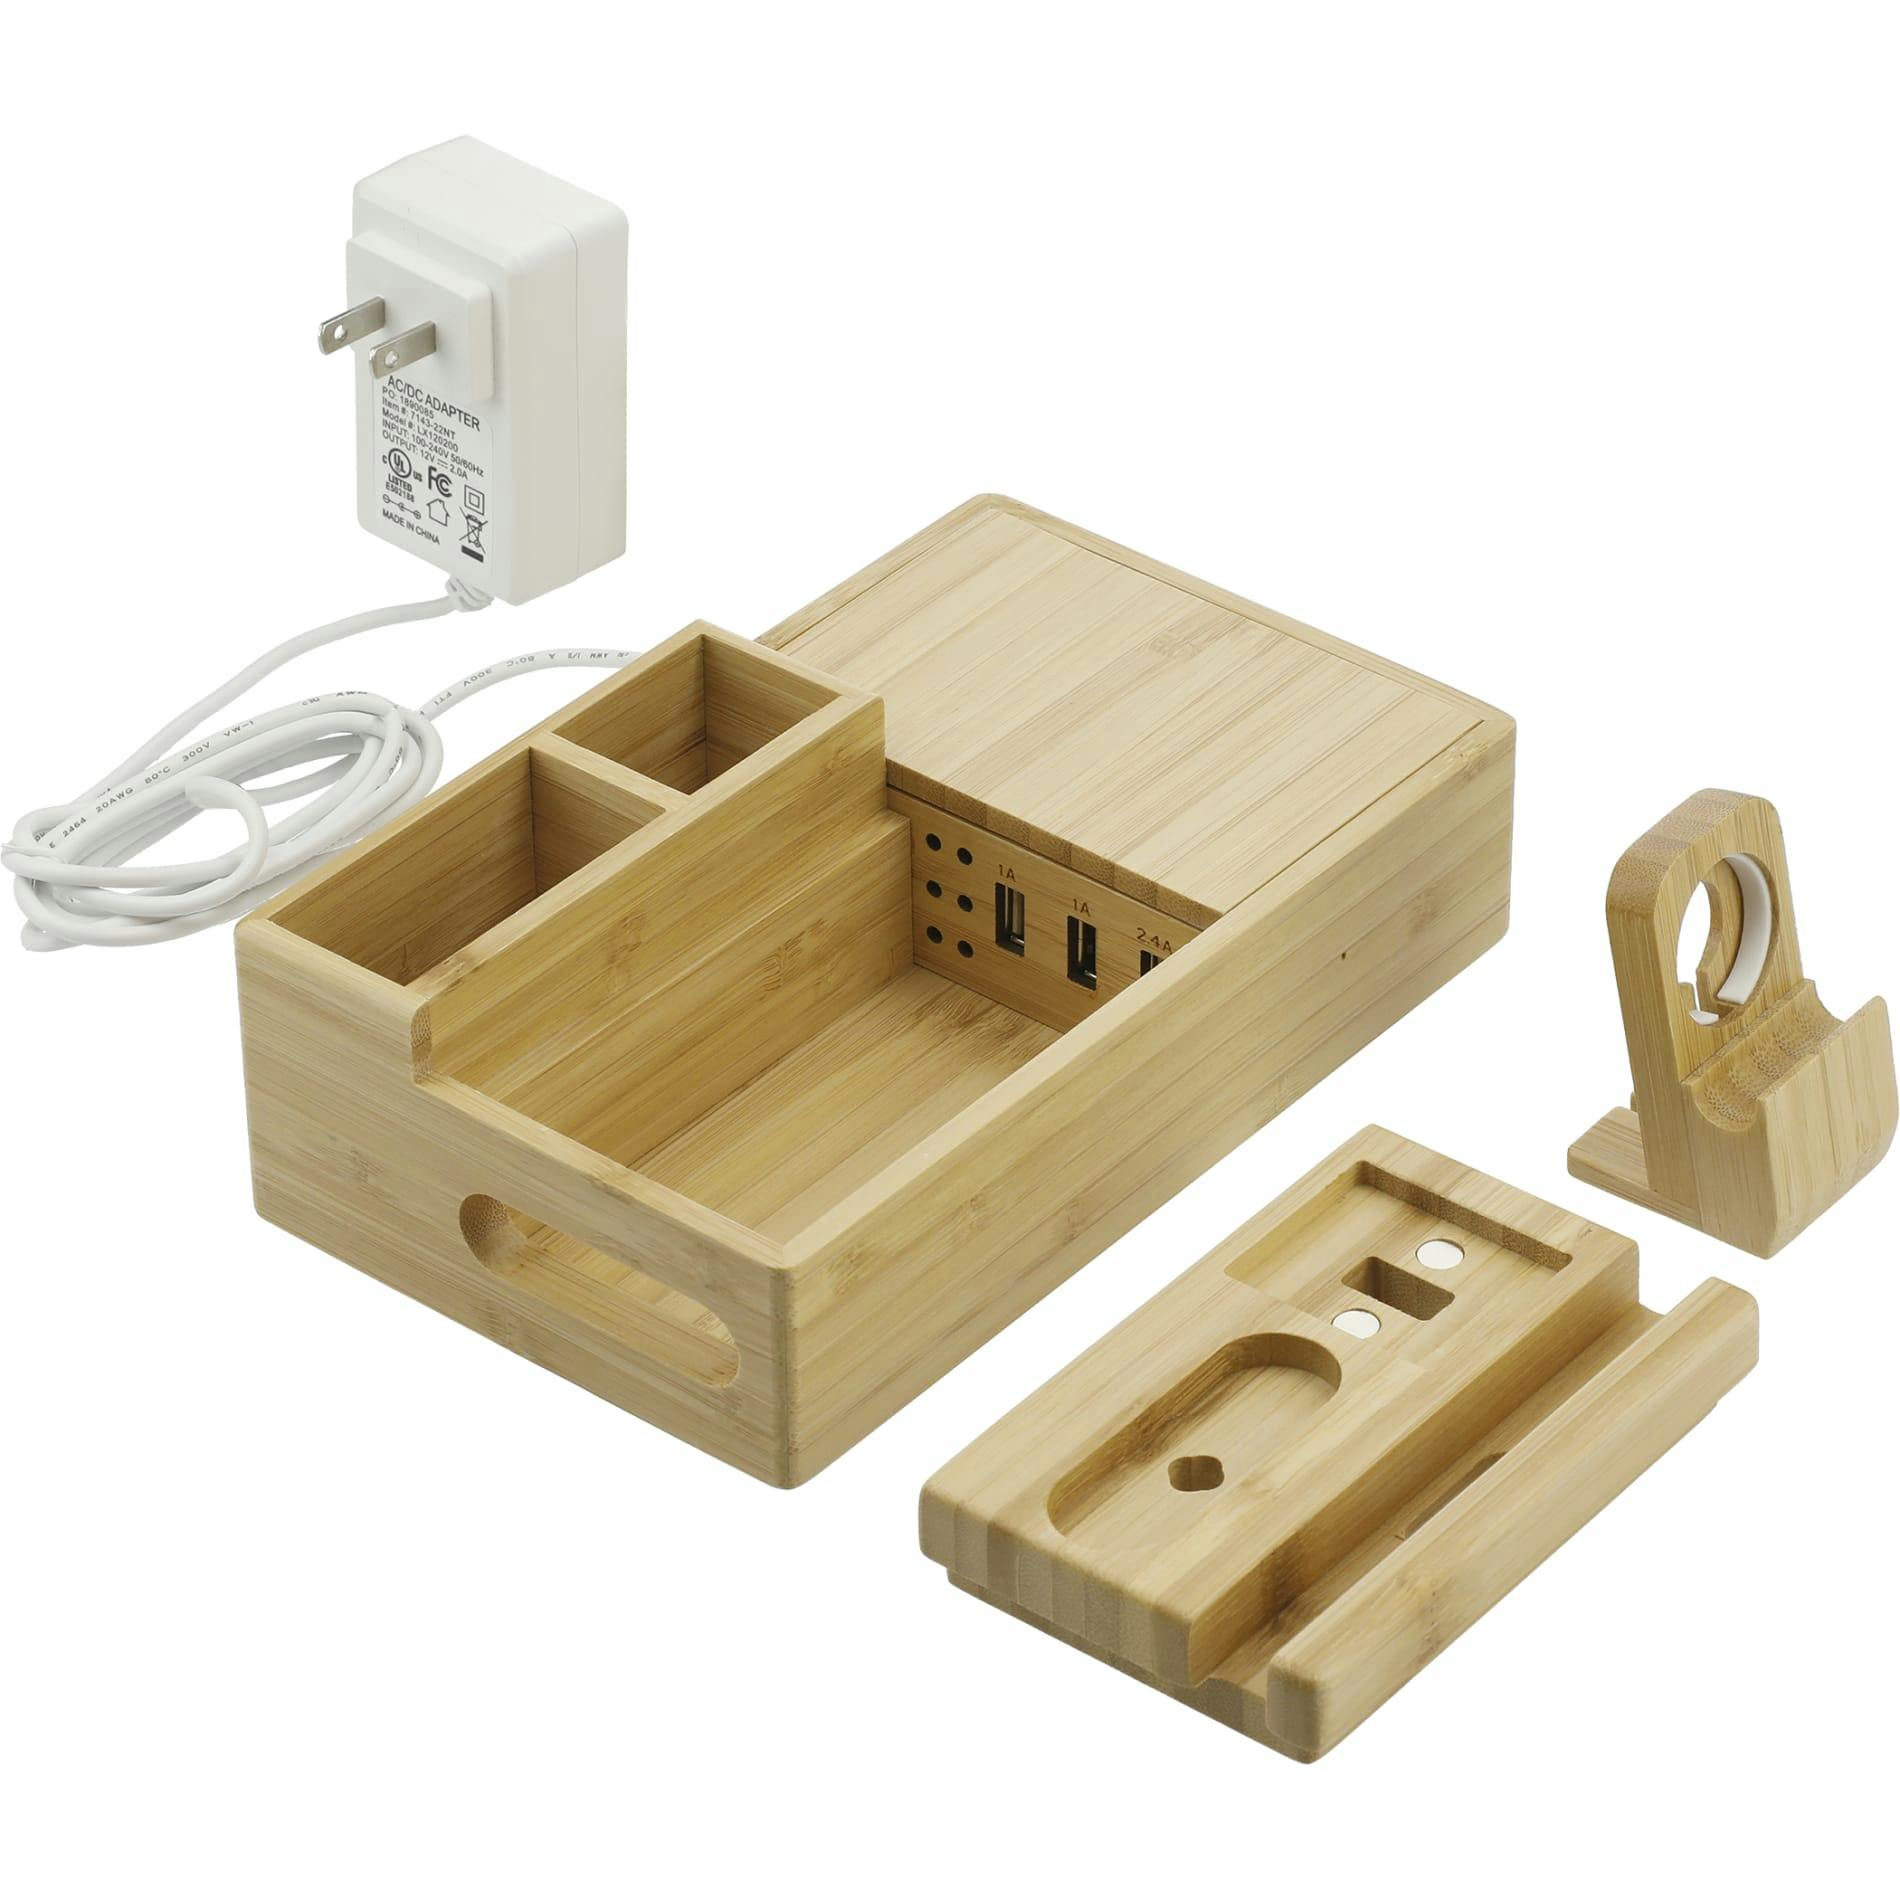 Bamboo Fast Wireless Charging Dock Station - additional Image 4